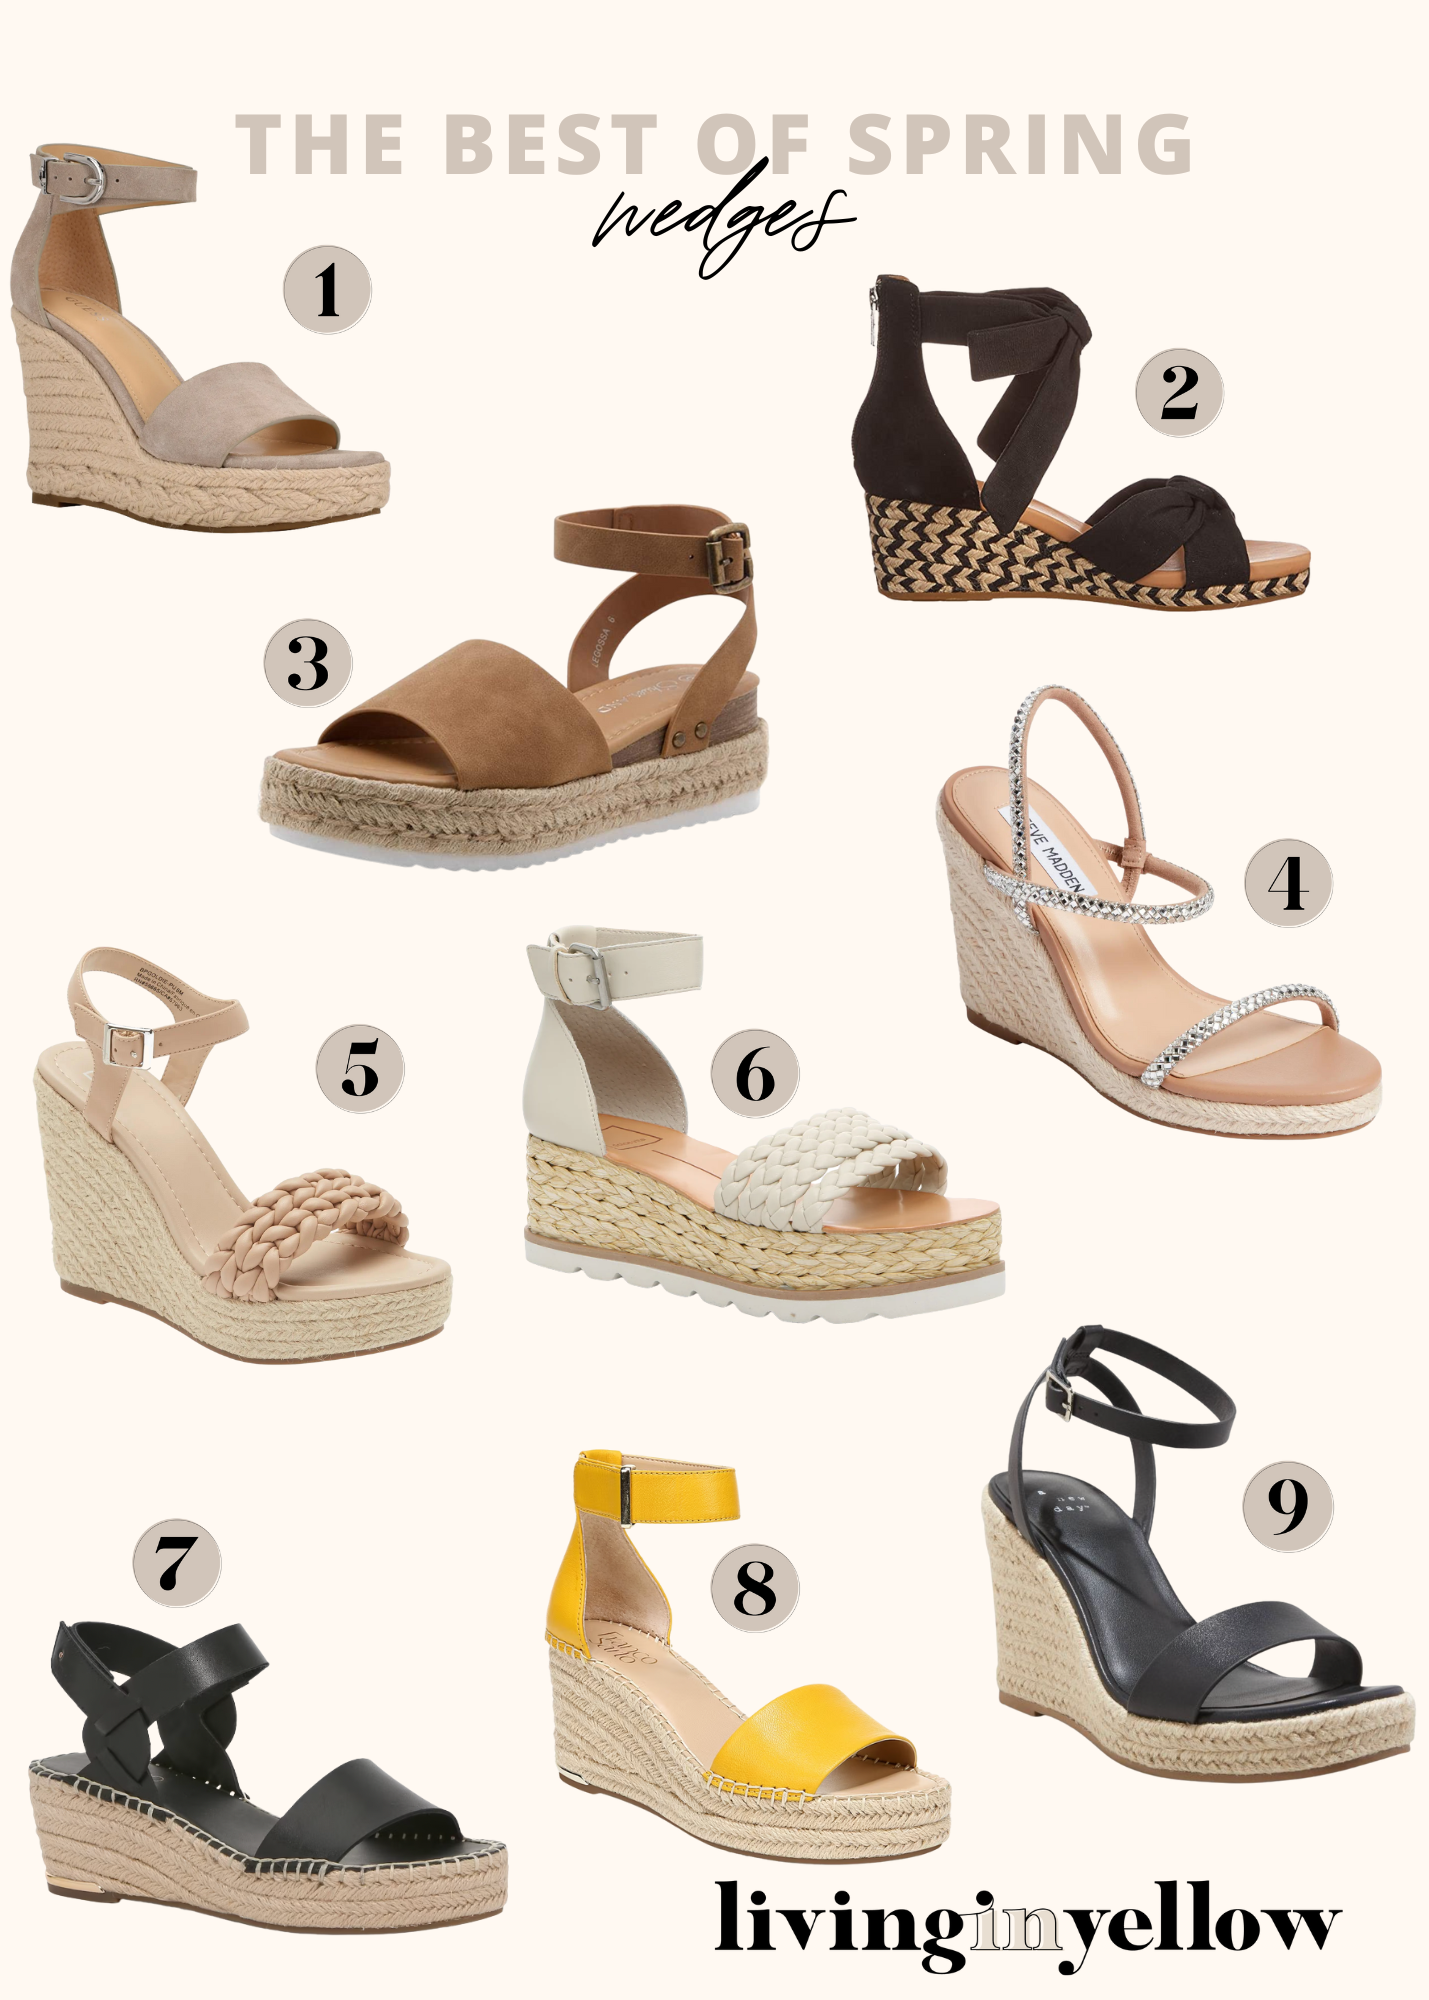 Our Favorite Shoes for Spring - Living in Yellow